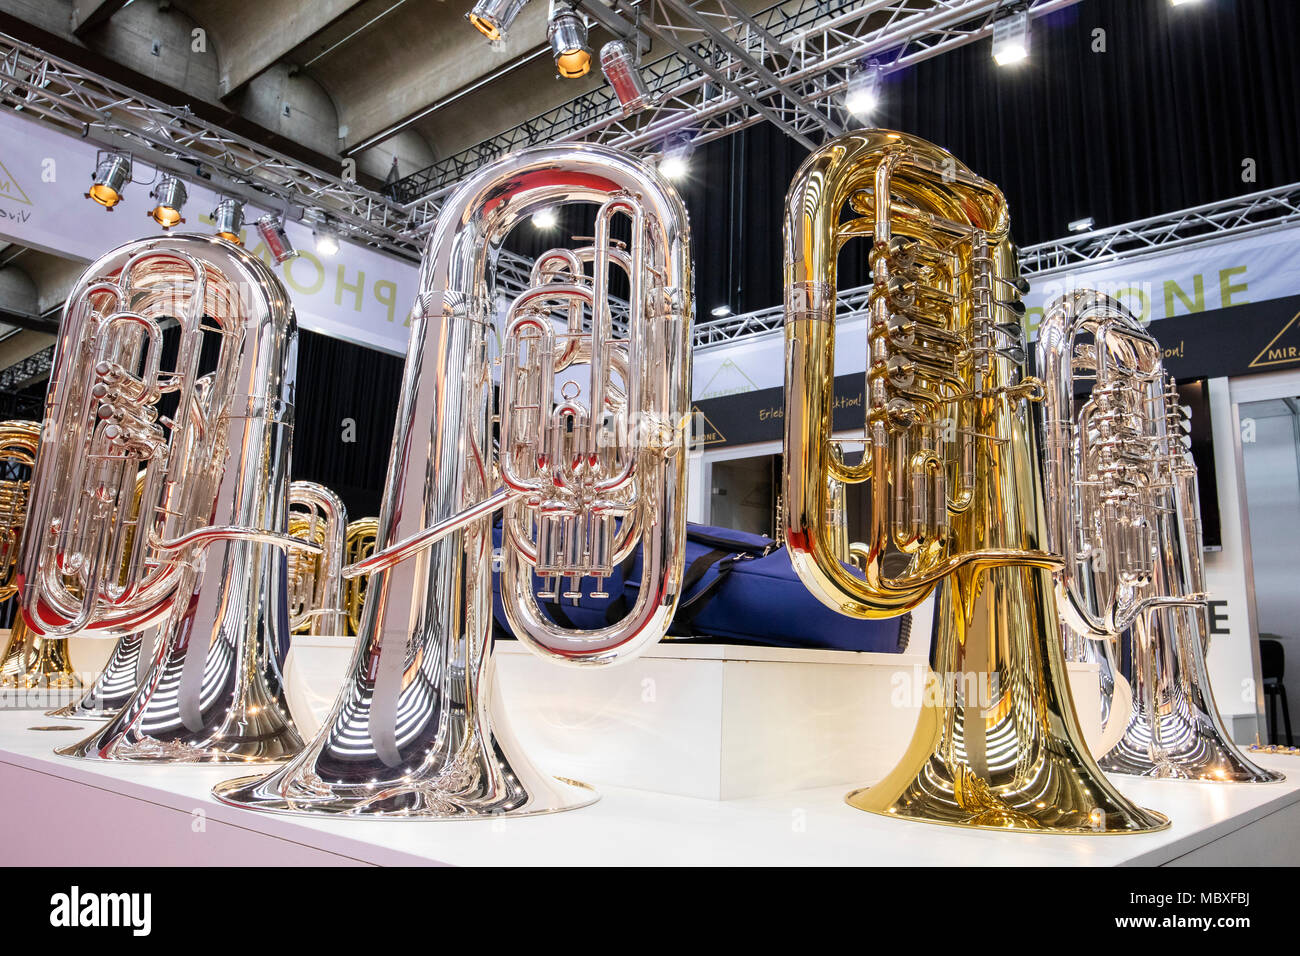 Frankfurt/Main, Germany. 11th April, 2018. Tubas of manufacturer Miraphone, Musikmesse Frankfurt, trade fair for musical instruments, sheet music, music production and marketing. Credit: Christian Lademann Stock Photo